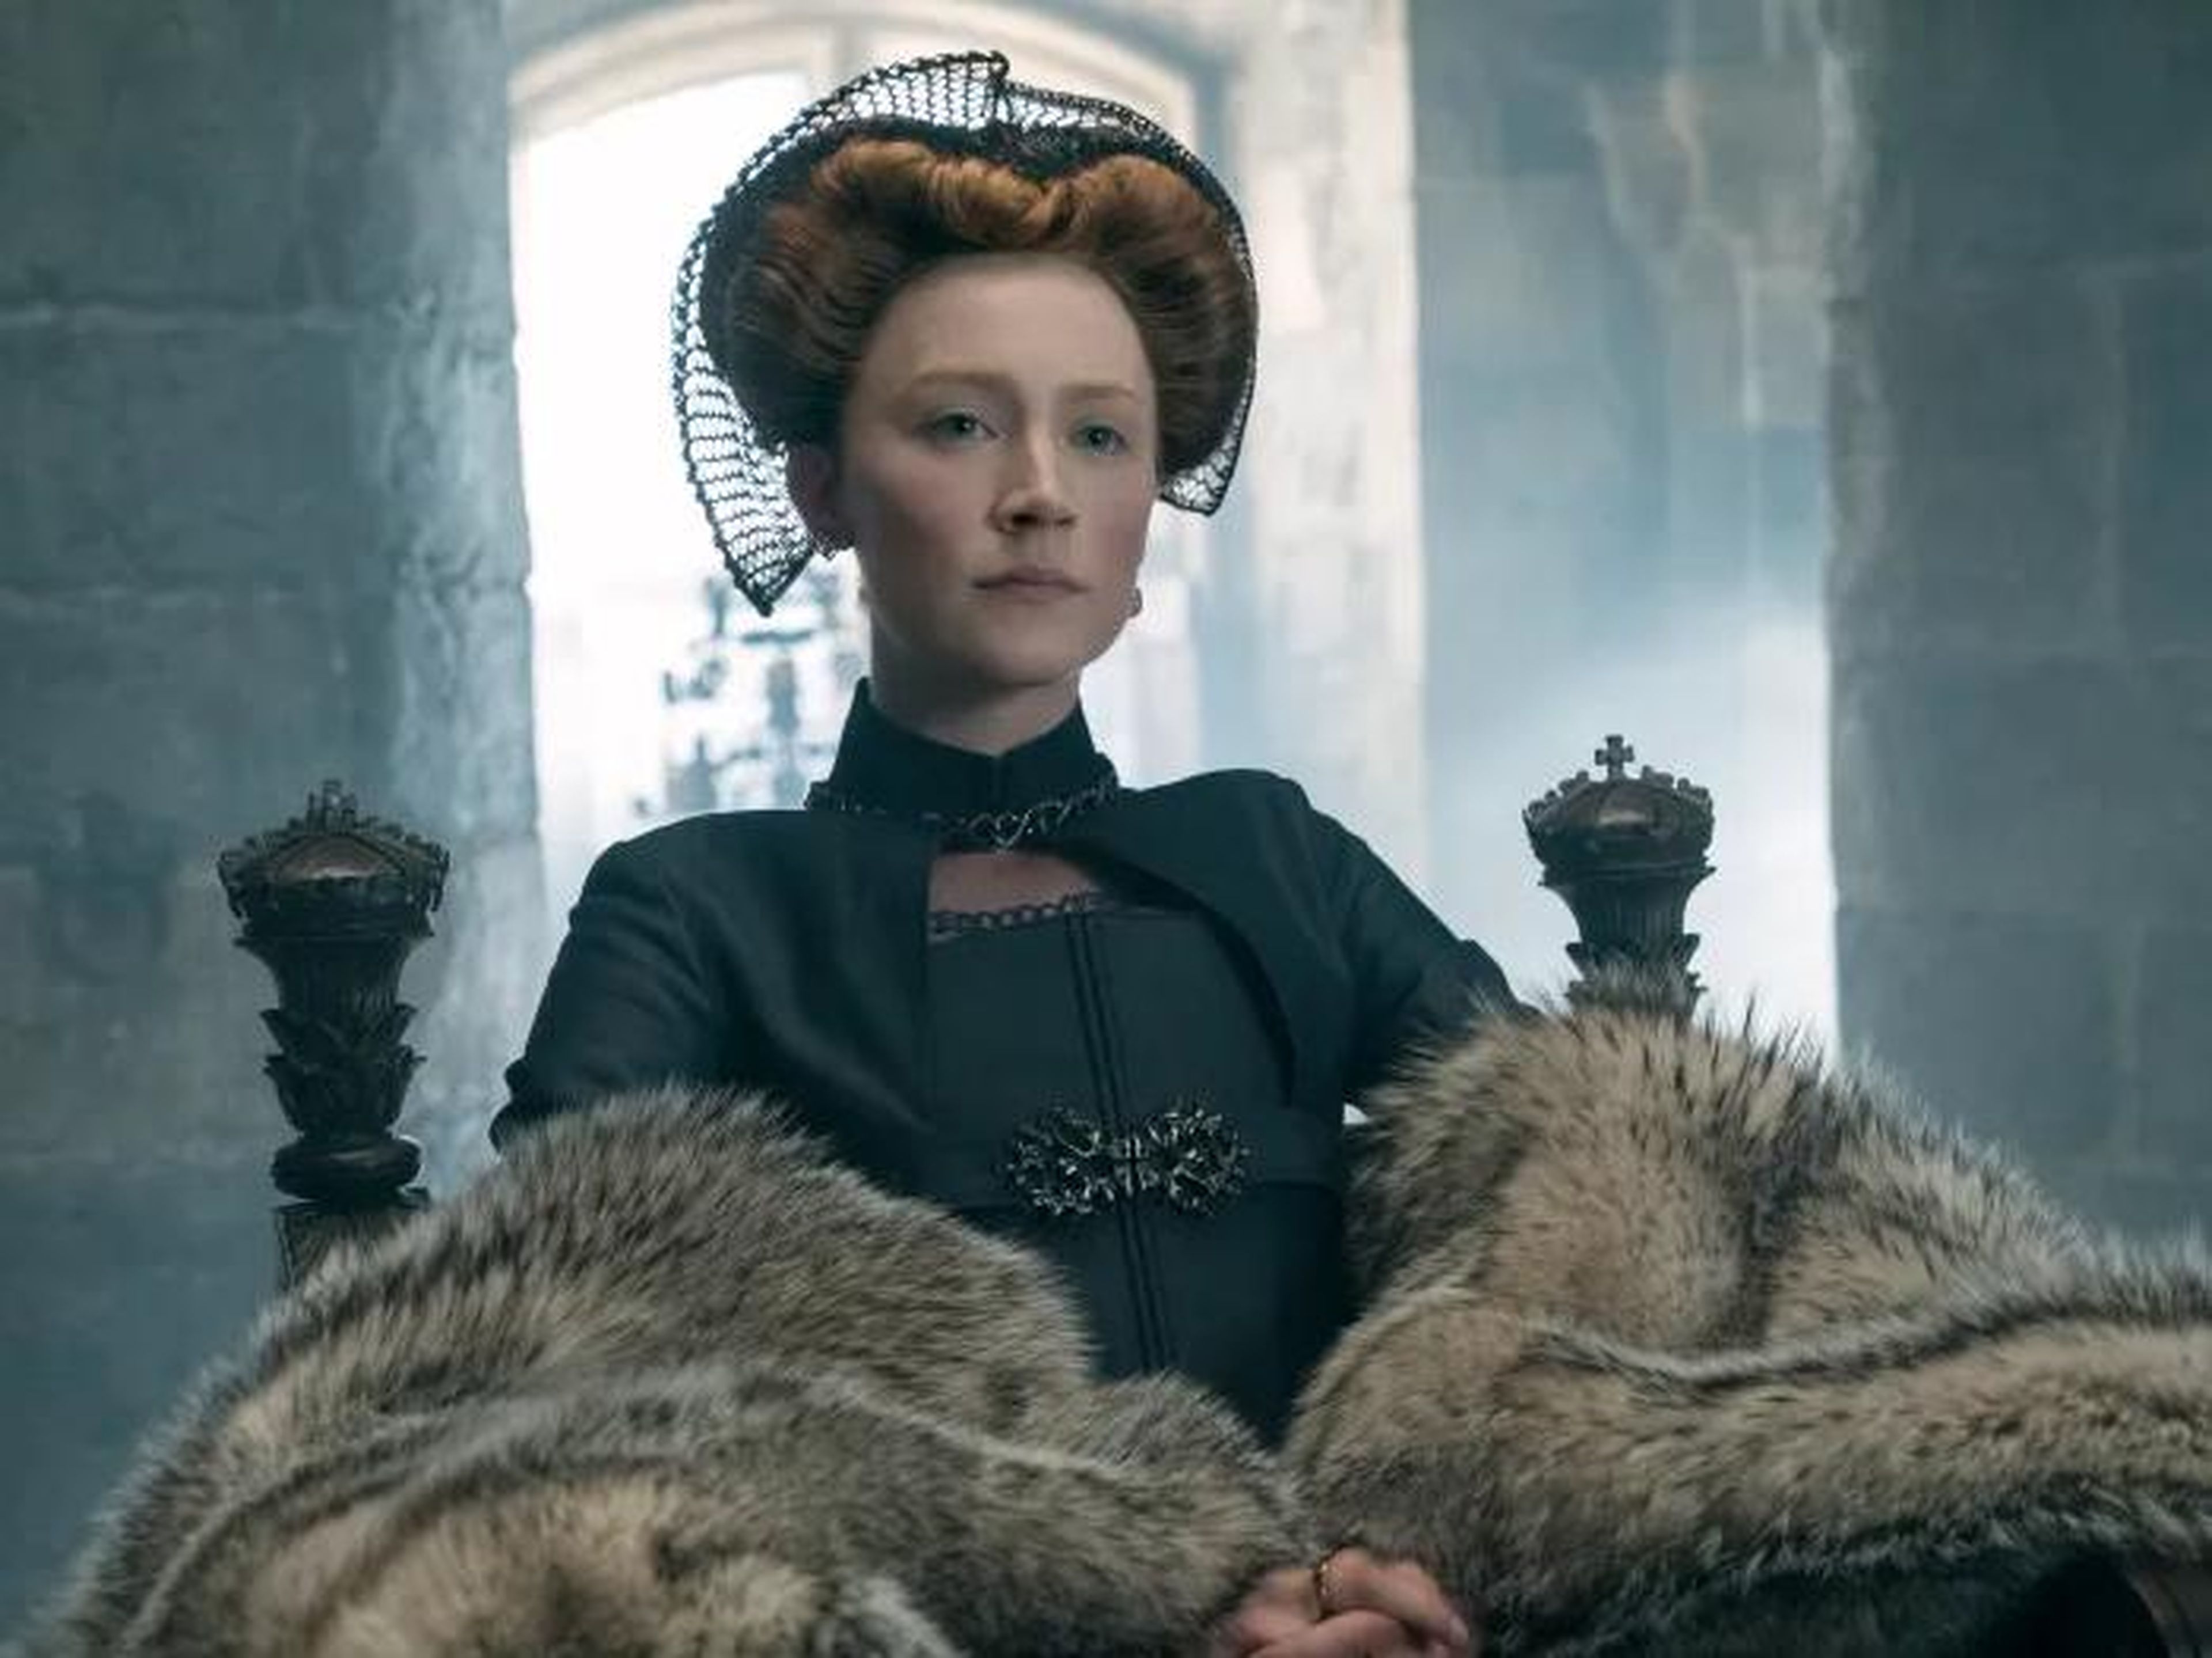 Saoirse Ronan and Margot Robbie star in "Mary Queen of Scots."